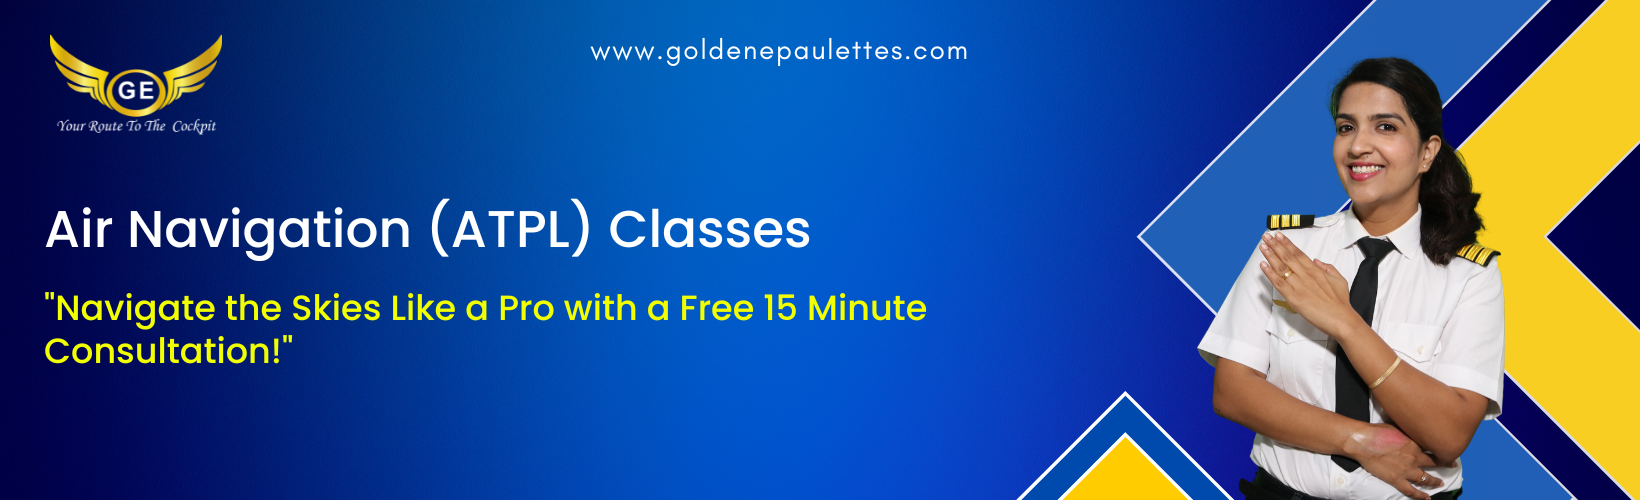 Join Our Comprehensive Classes and Launch Your Aviation Career with Golden Epaulettes Aviation